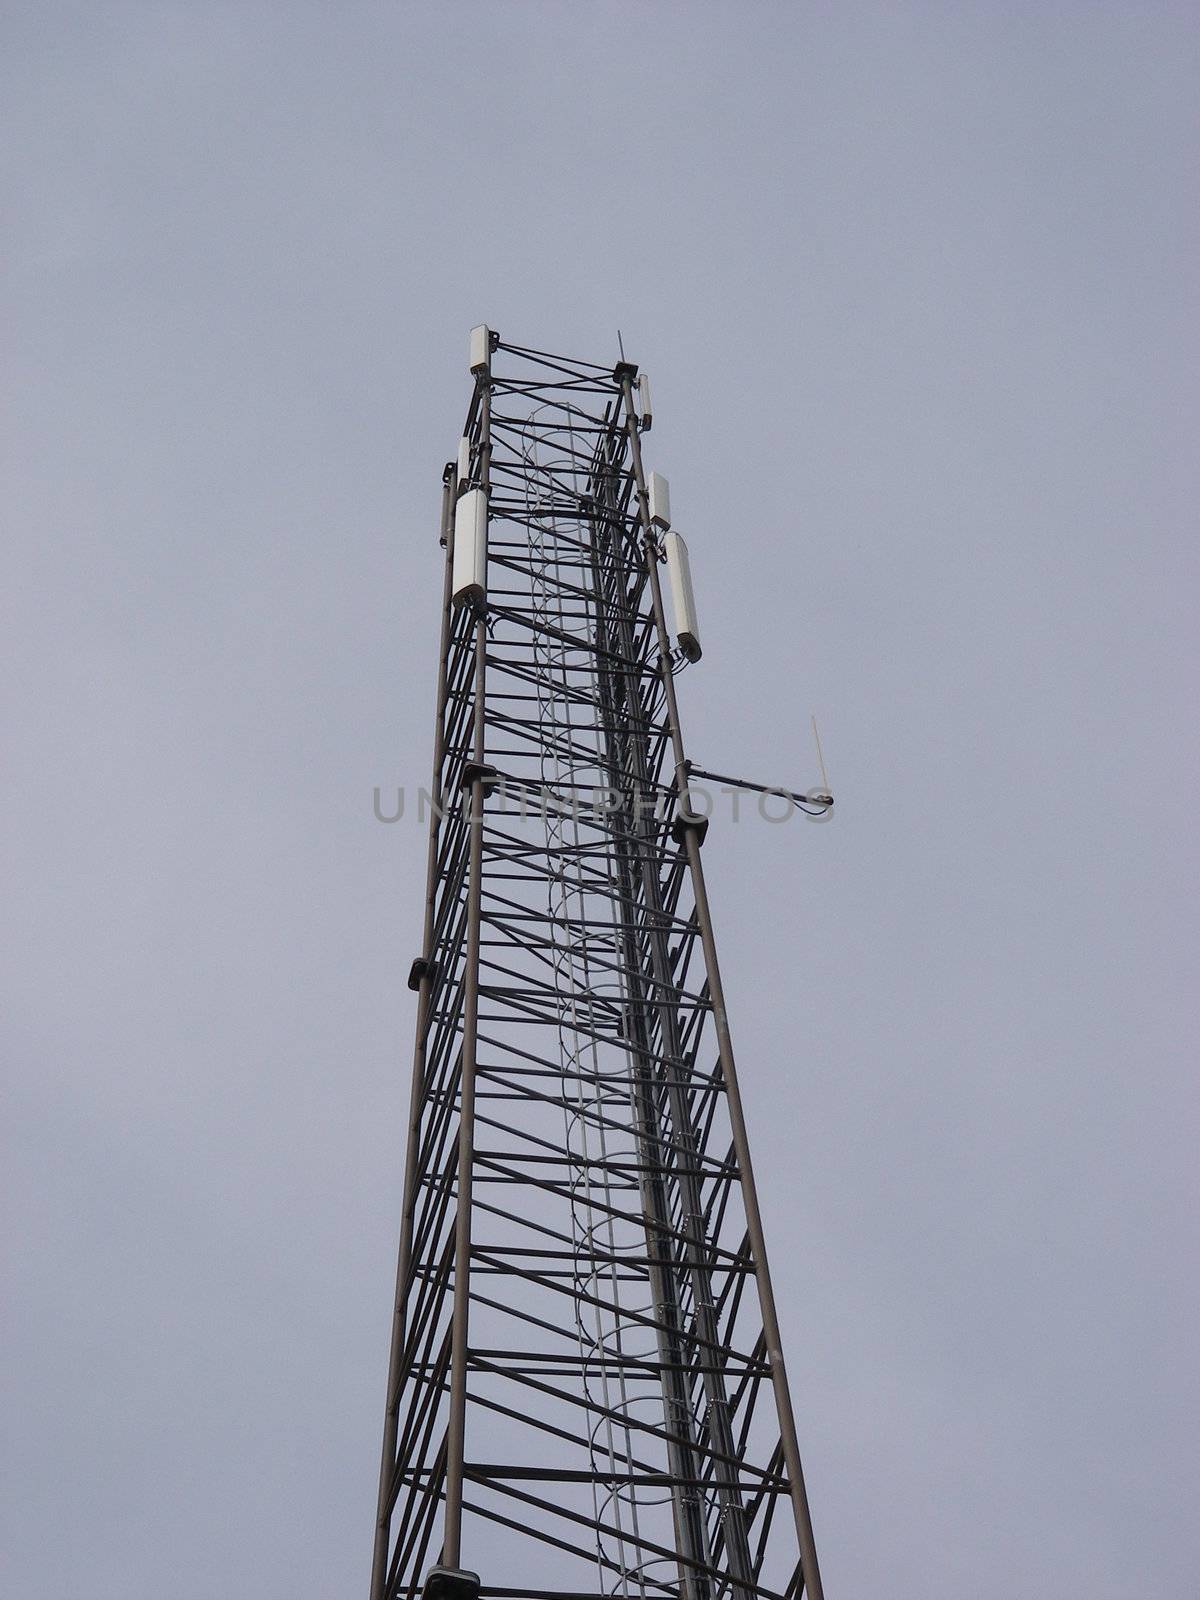 portrait closeup of endless communication-tower reach for sky on smooth background